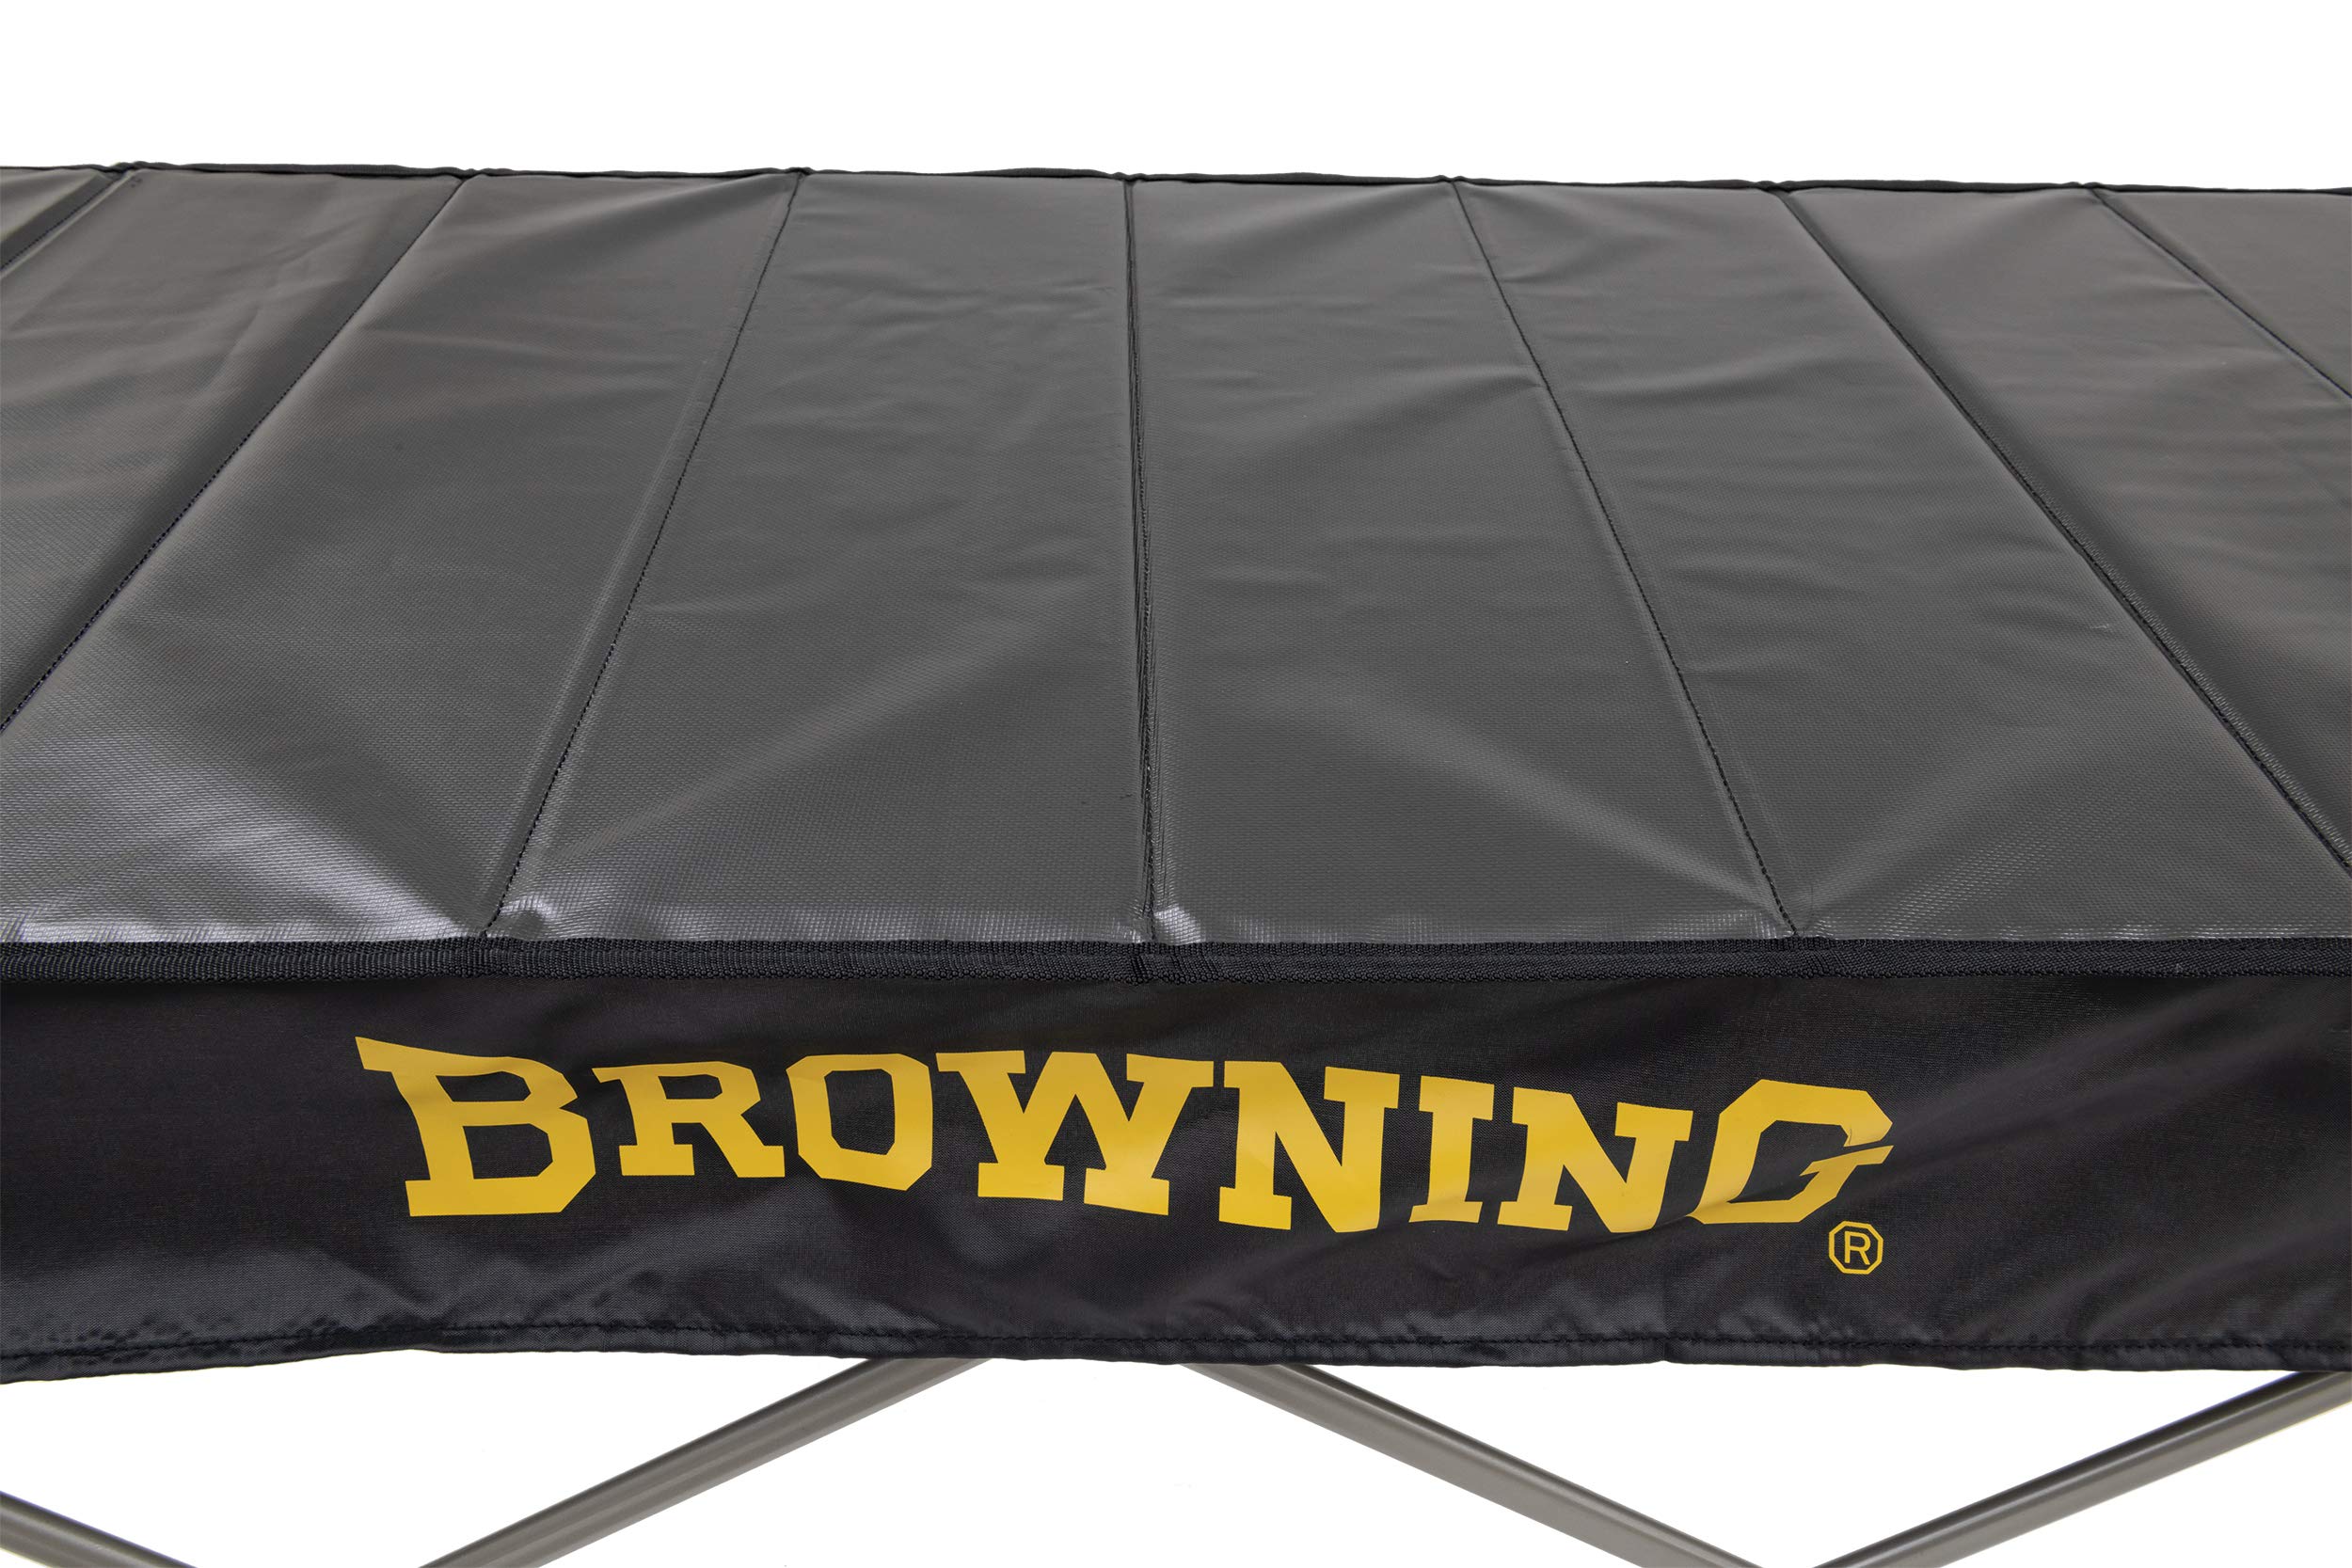 Browning Camping Outfitter Camping Table, One Size, Black